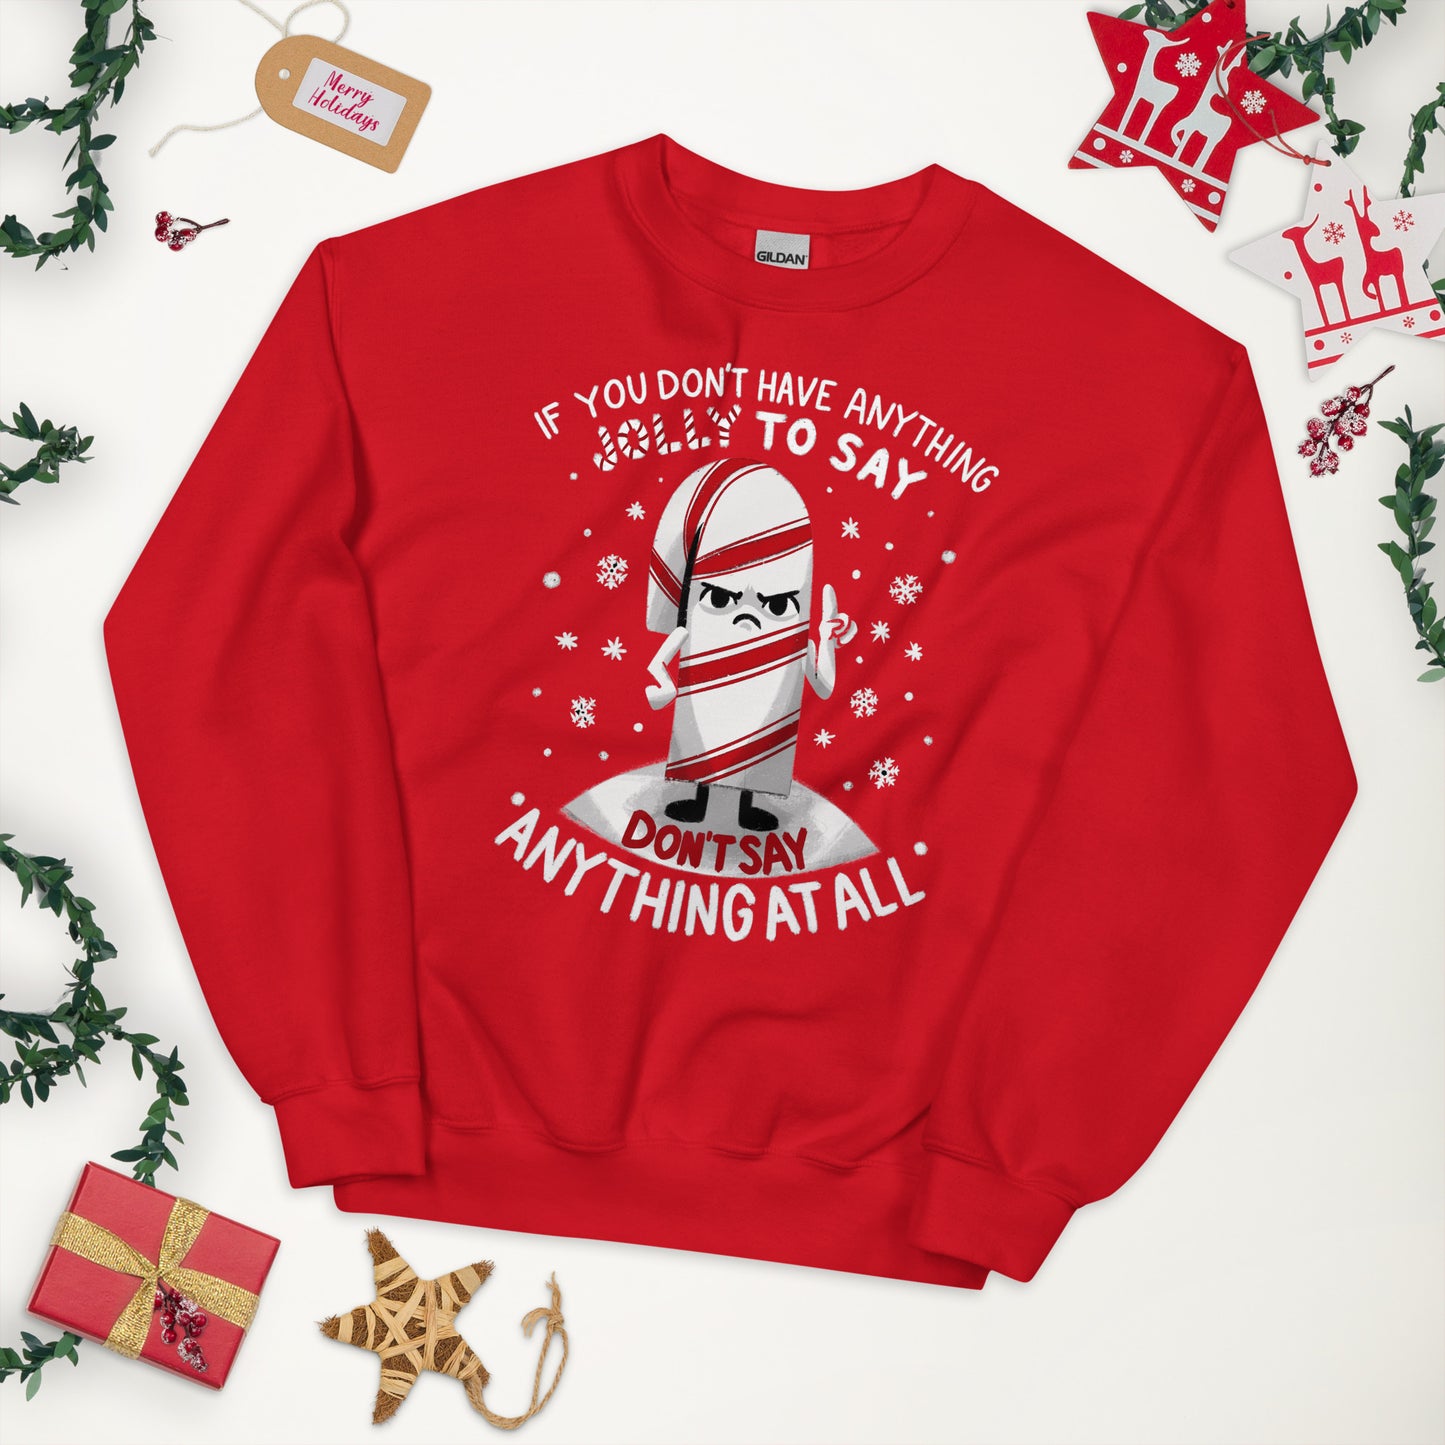 If You Don't Have Anything Jolly to Say - Funny Candy Cane Christmas Sweater